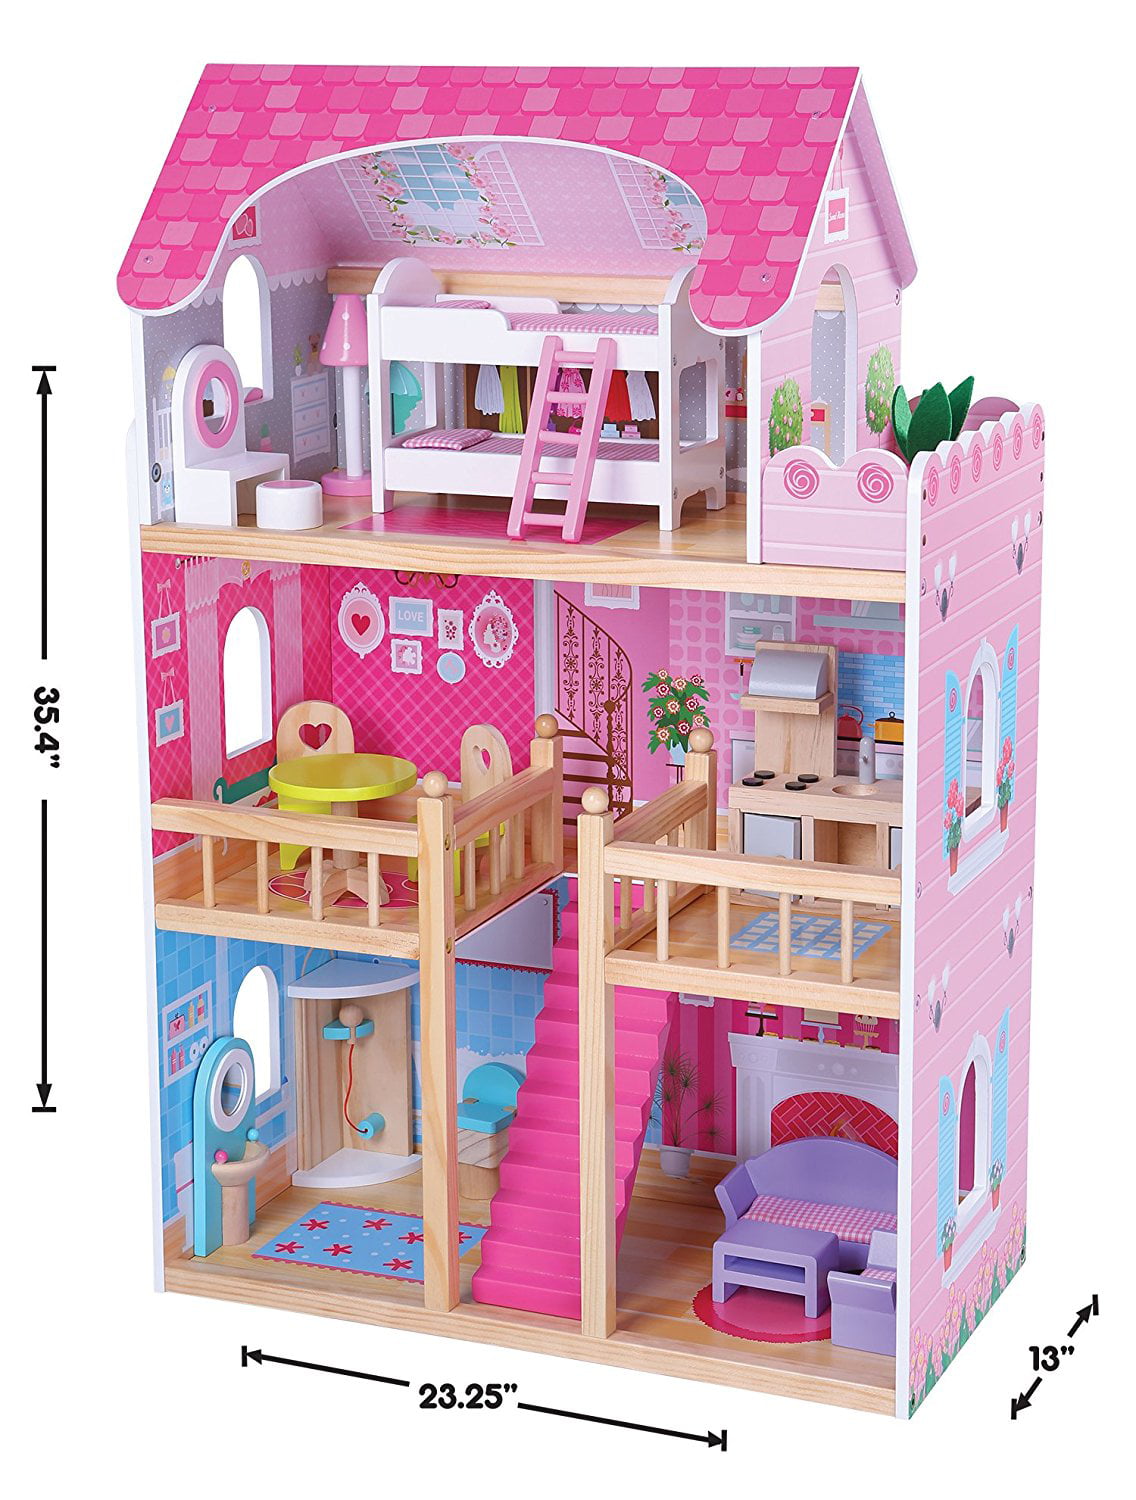 3 ft doll house